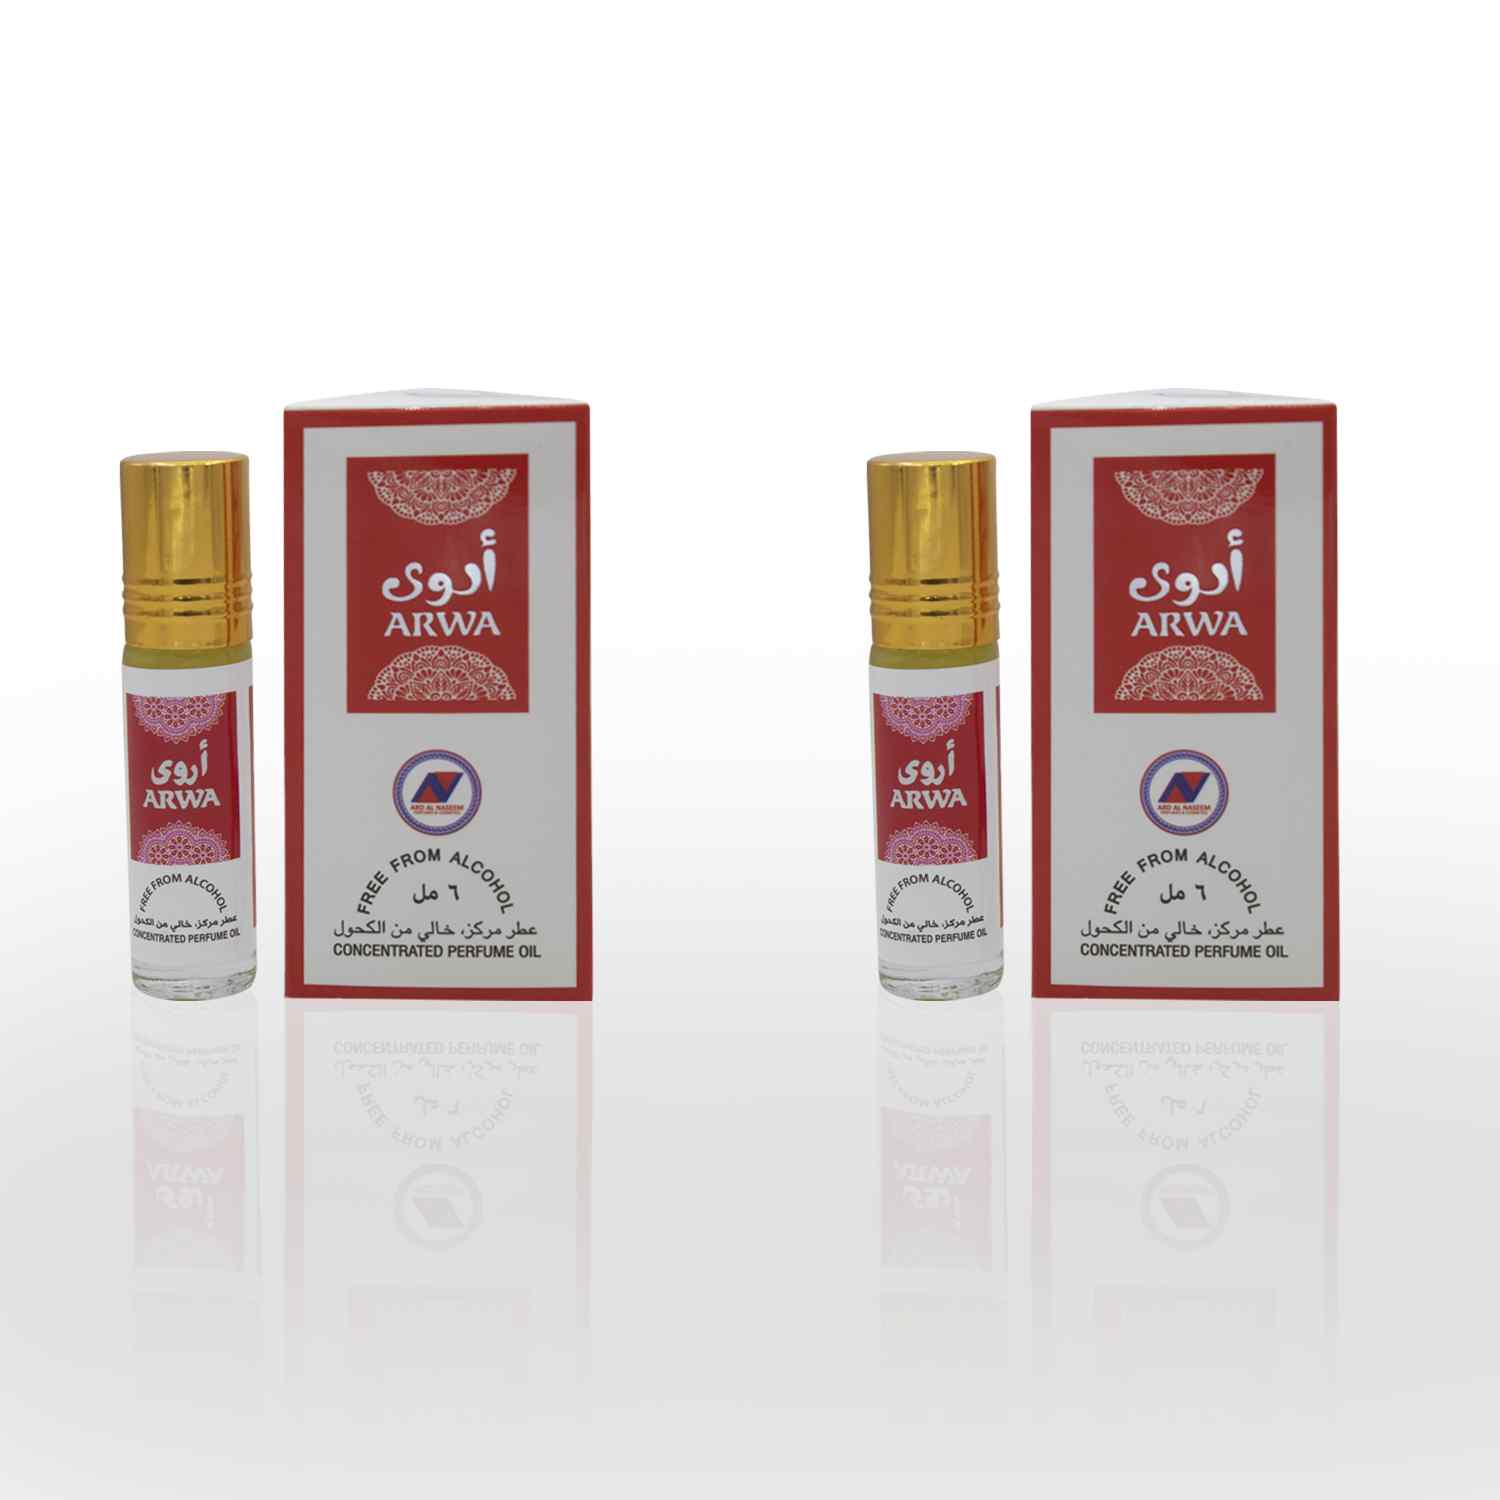 Arwa concentrated oil attar rollon 6ml by Ard perfumes